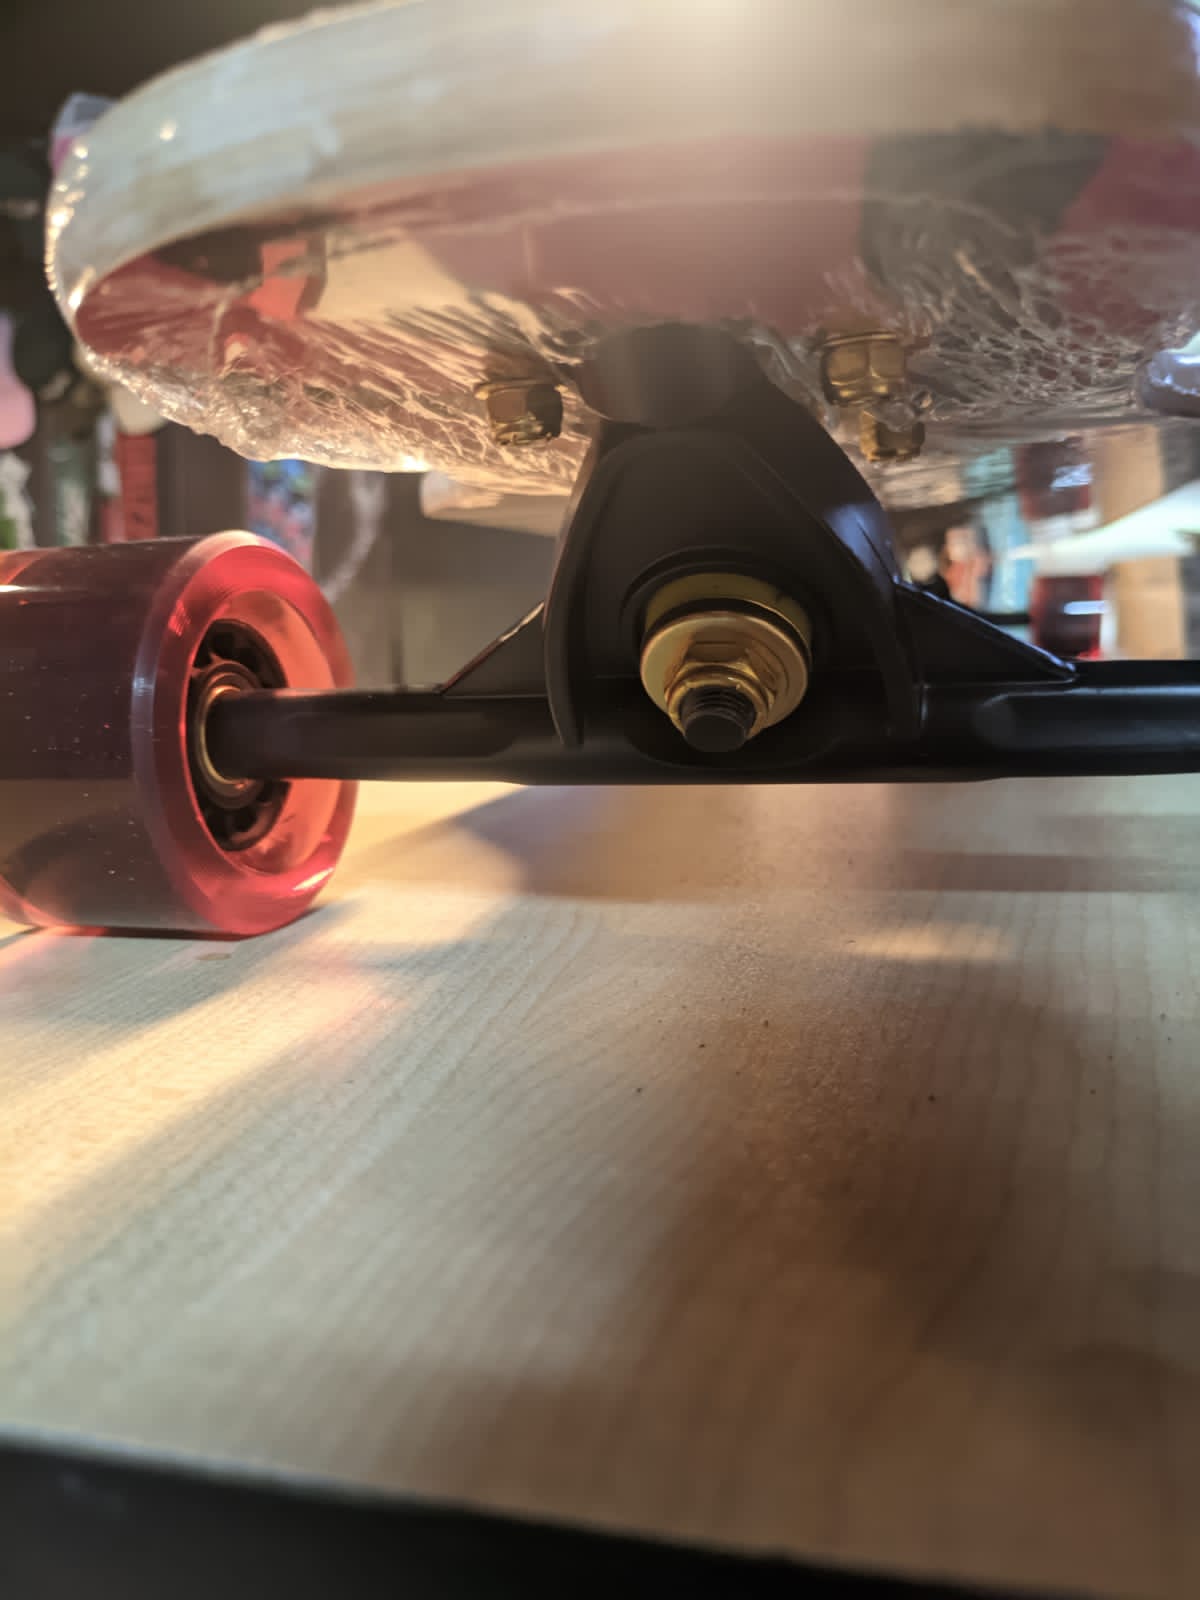 The 70mm x 51mm glide smoothly with the help of ABEC-9 bearings and high-speed lubrication.